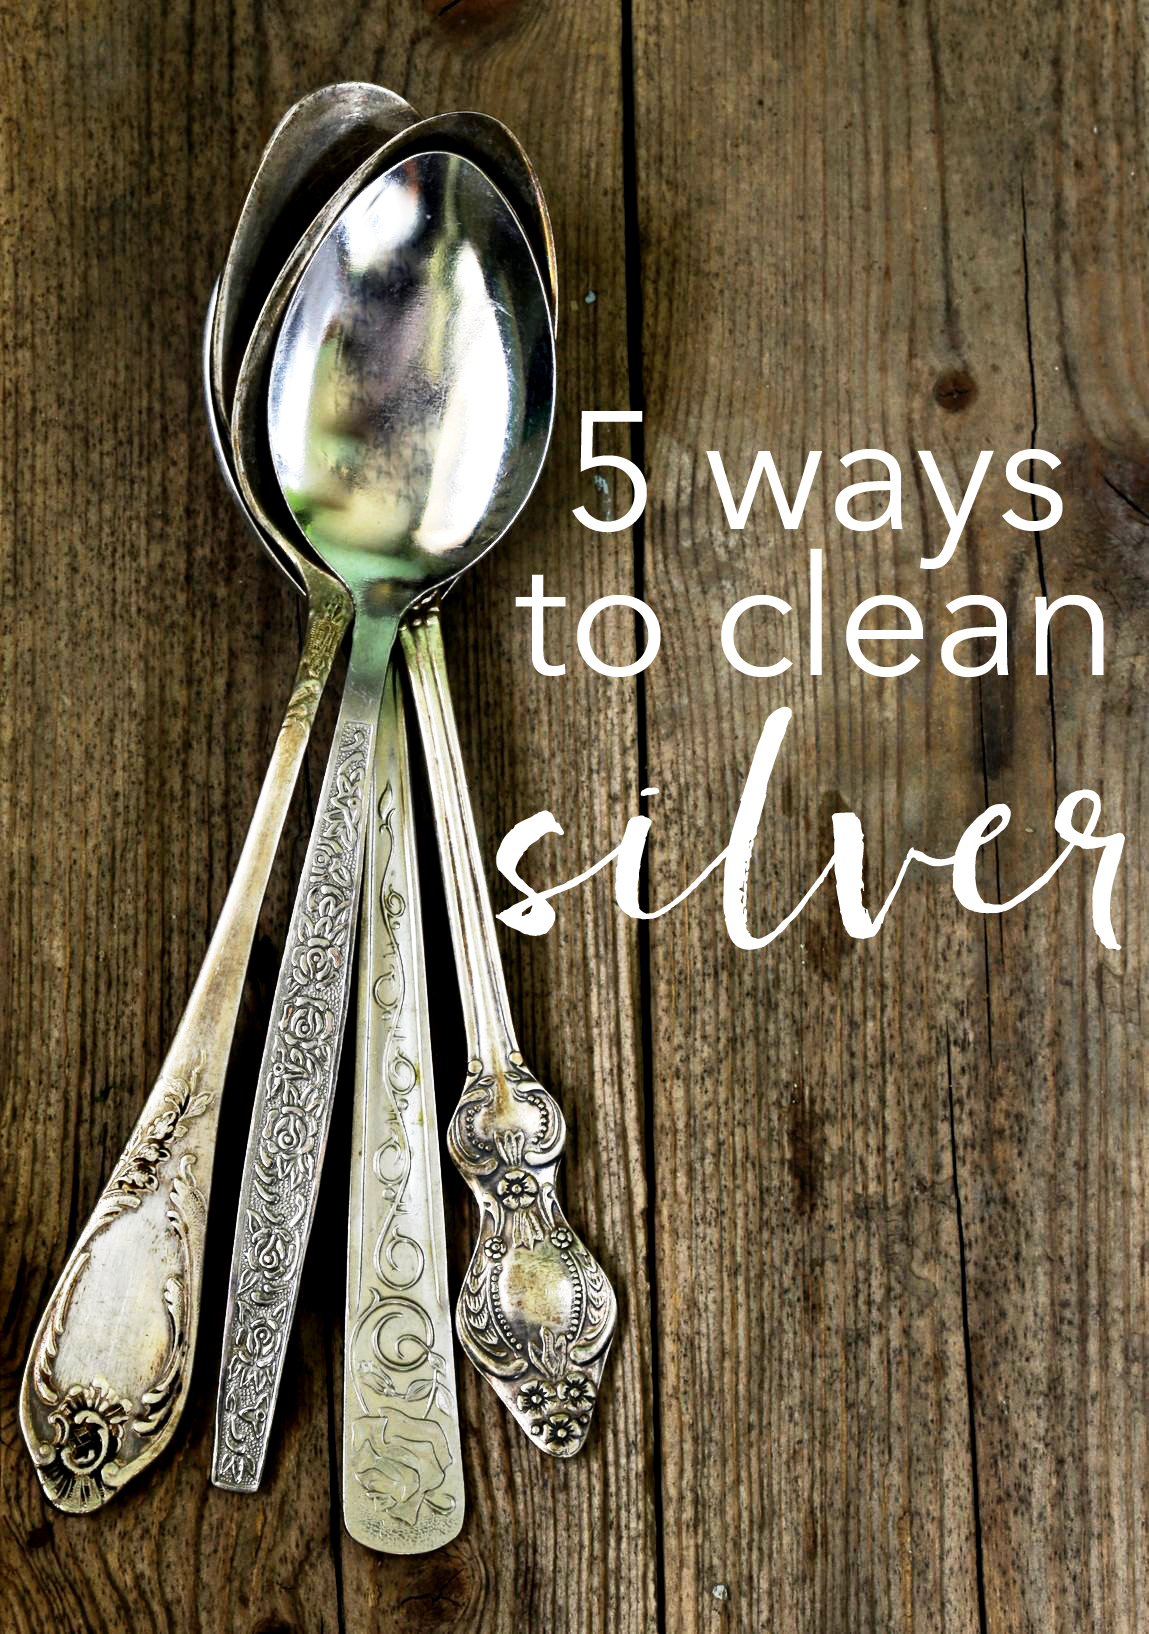 How to clean silver (29 tricks that work with things you have!)